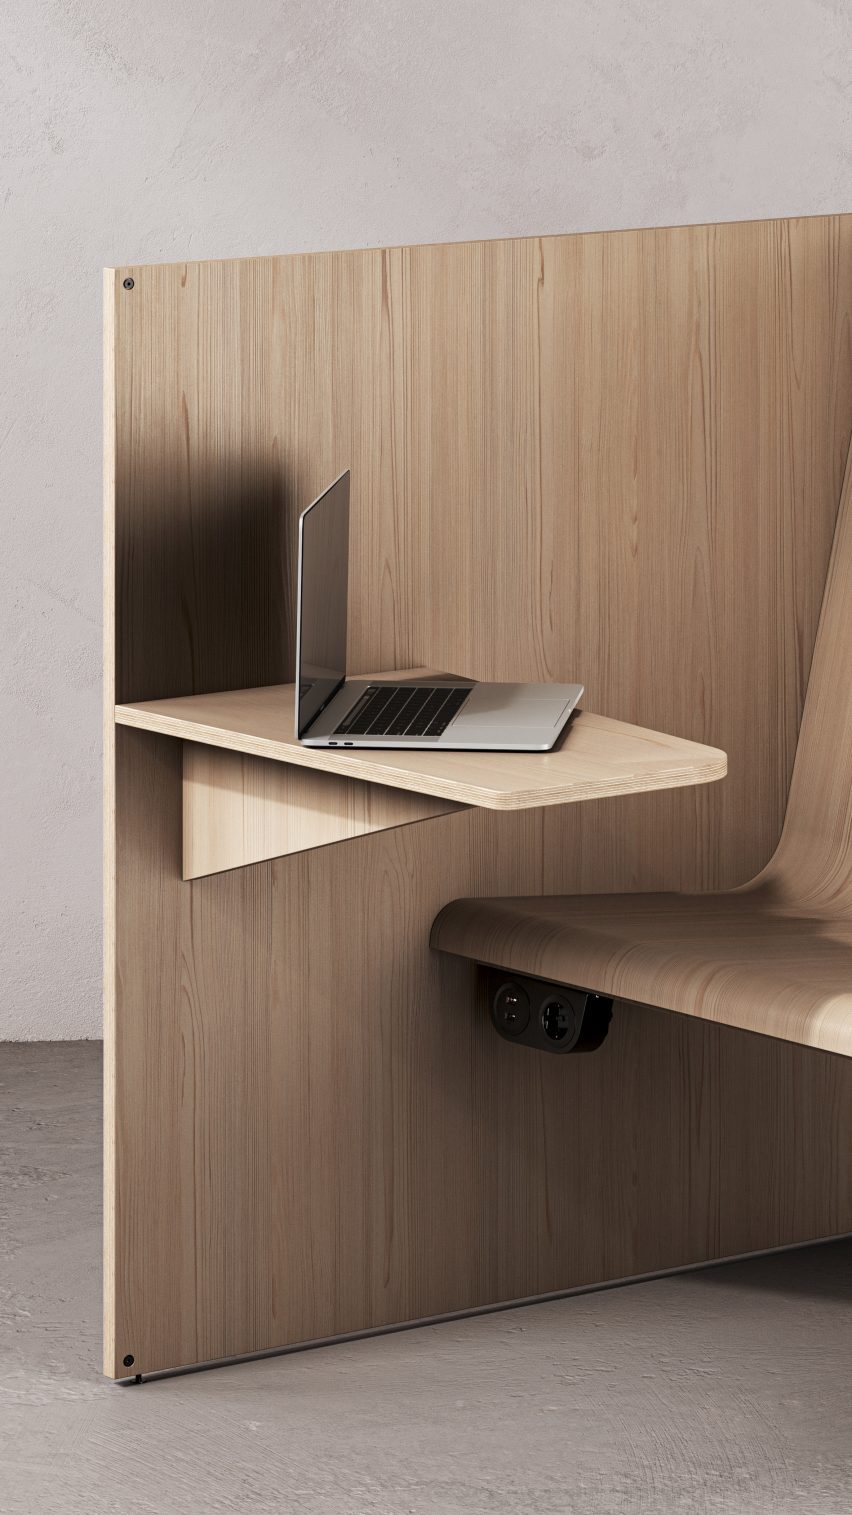 Laptop on timber worktop by +Halle